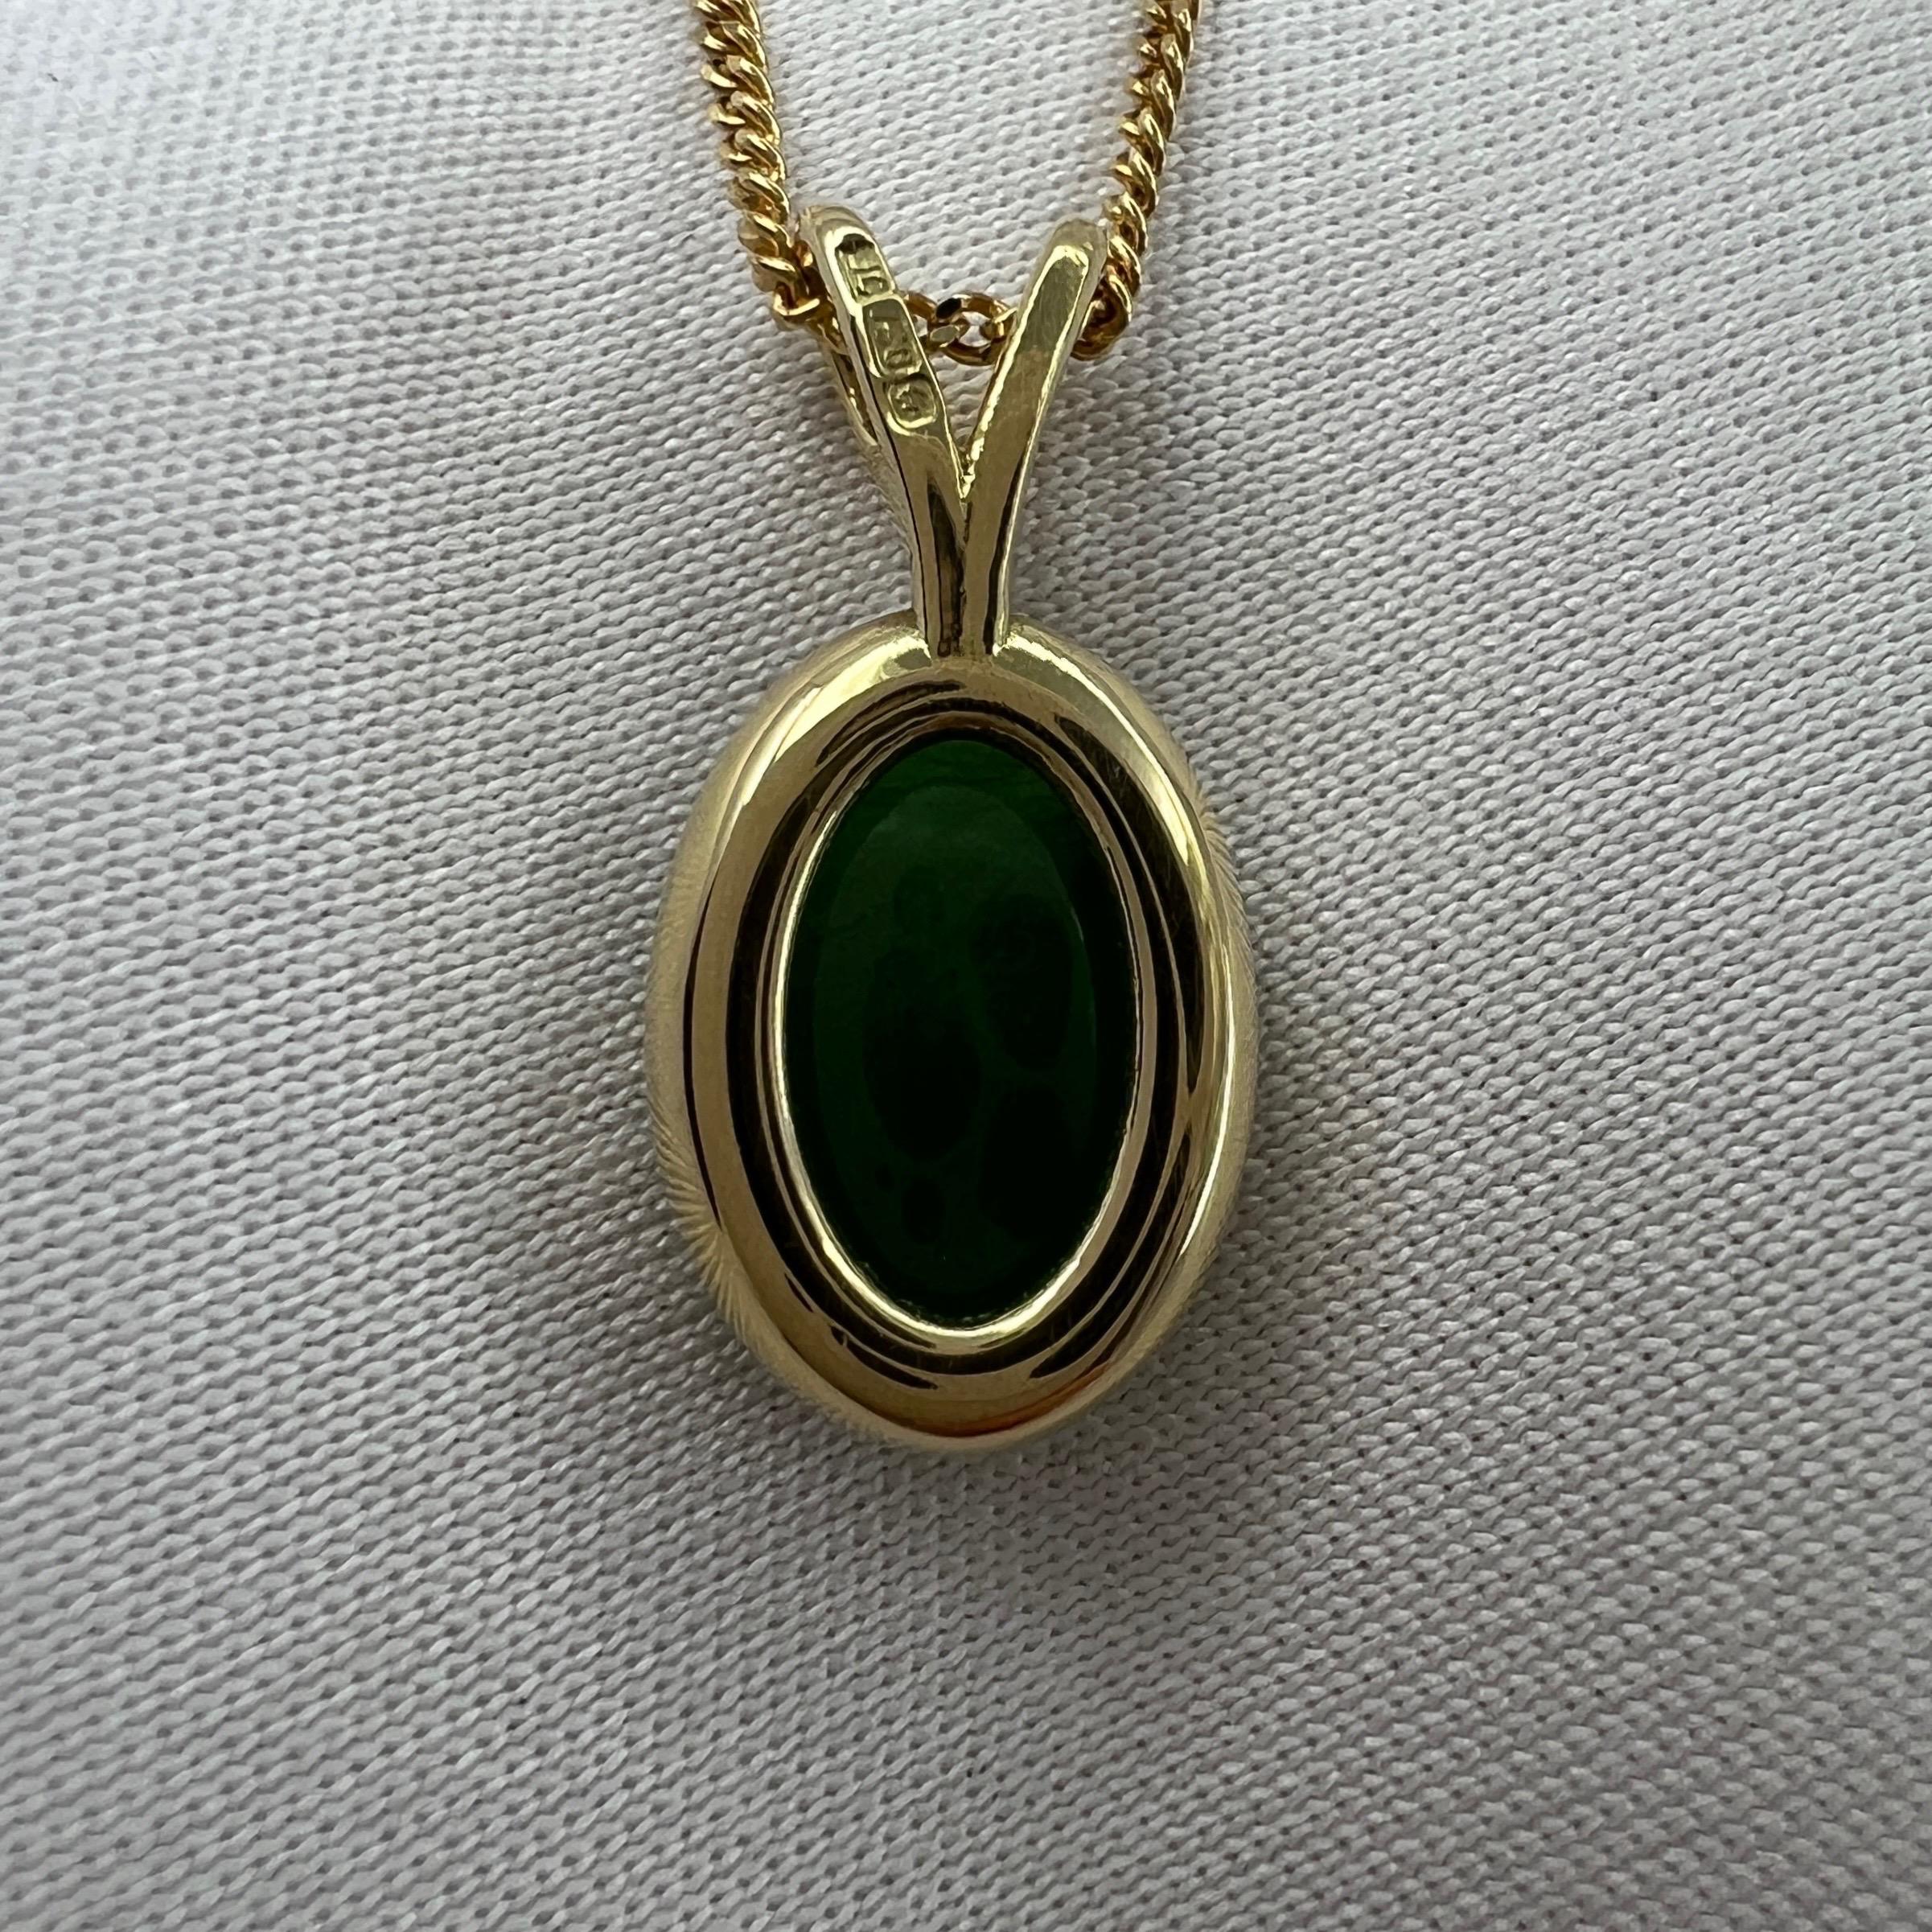 Cabochon 2.08ct GIA Certified Untreated Jadeite Jade A Grade 18k Yellow Gold Oval Pendant For Sale